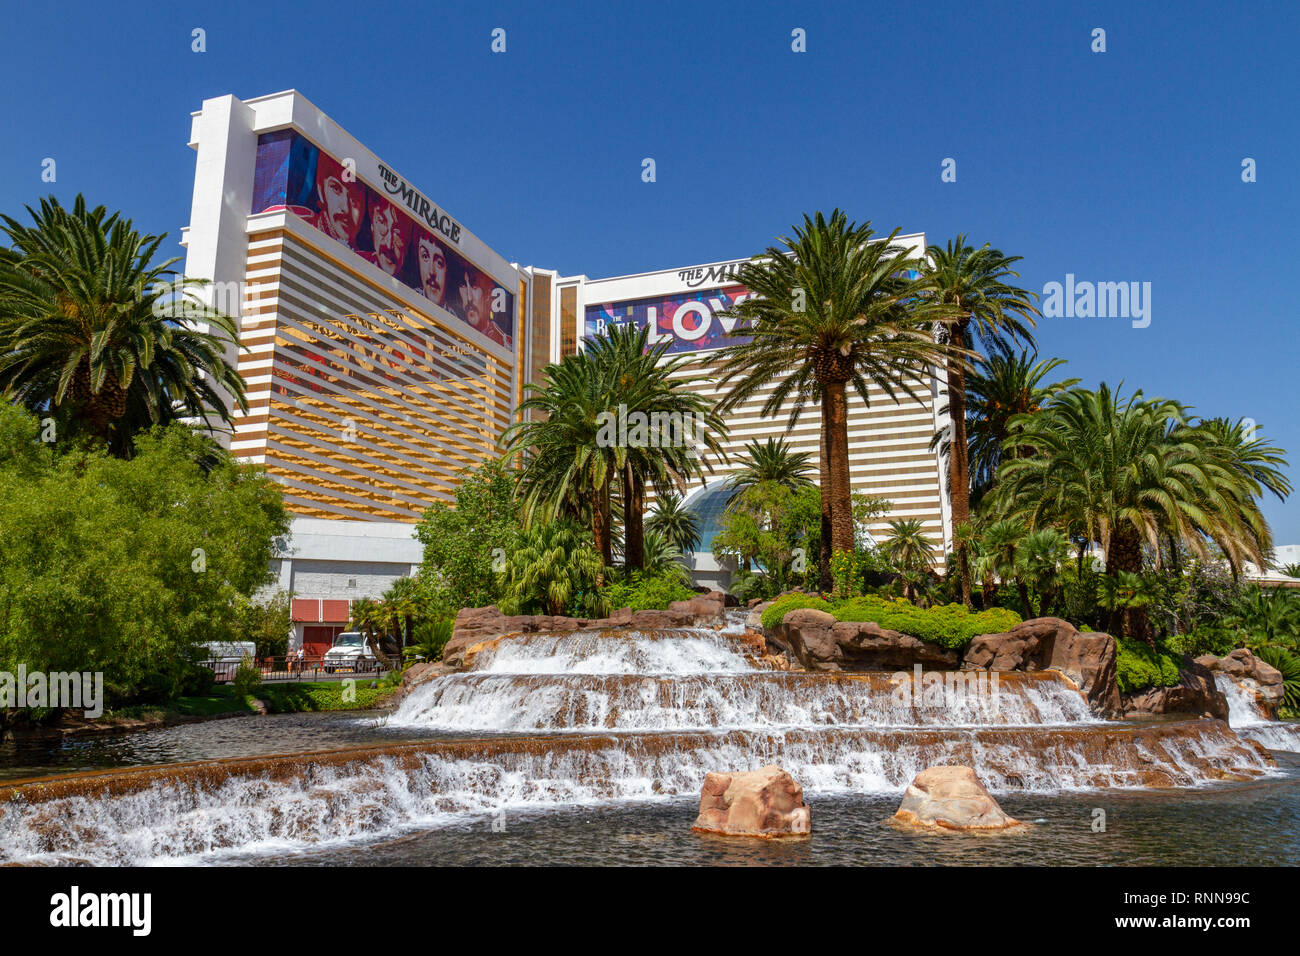 Fountain in front of the Mirage Hotel And Casino on The Strip, Las Vegas, Nevada, United States. Stock Photo